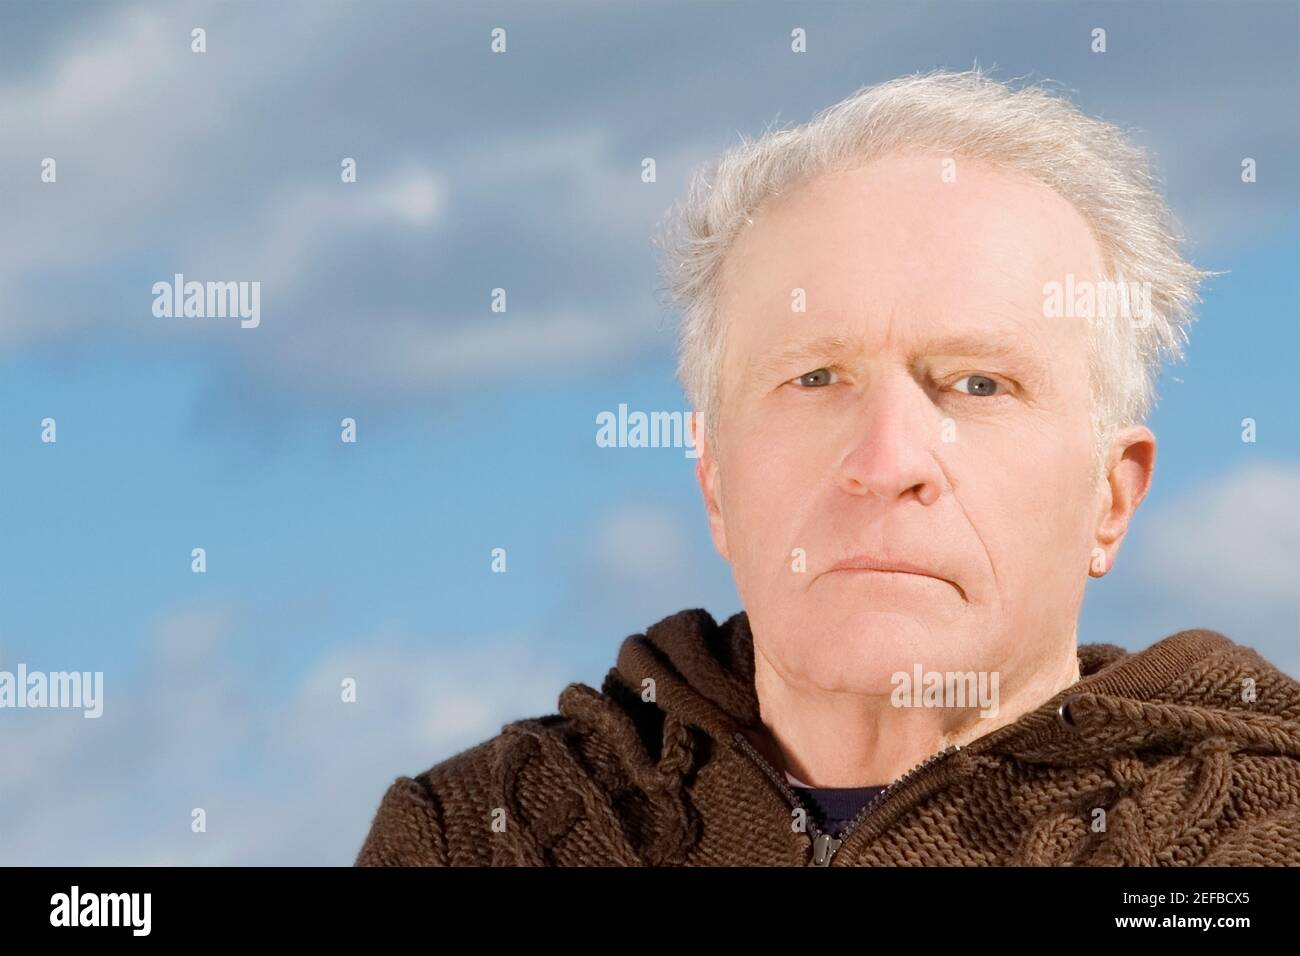 Portrait of a senior man looking serious Stock Photo